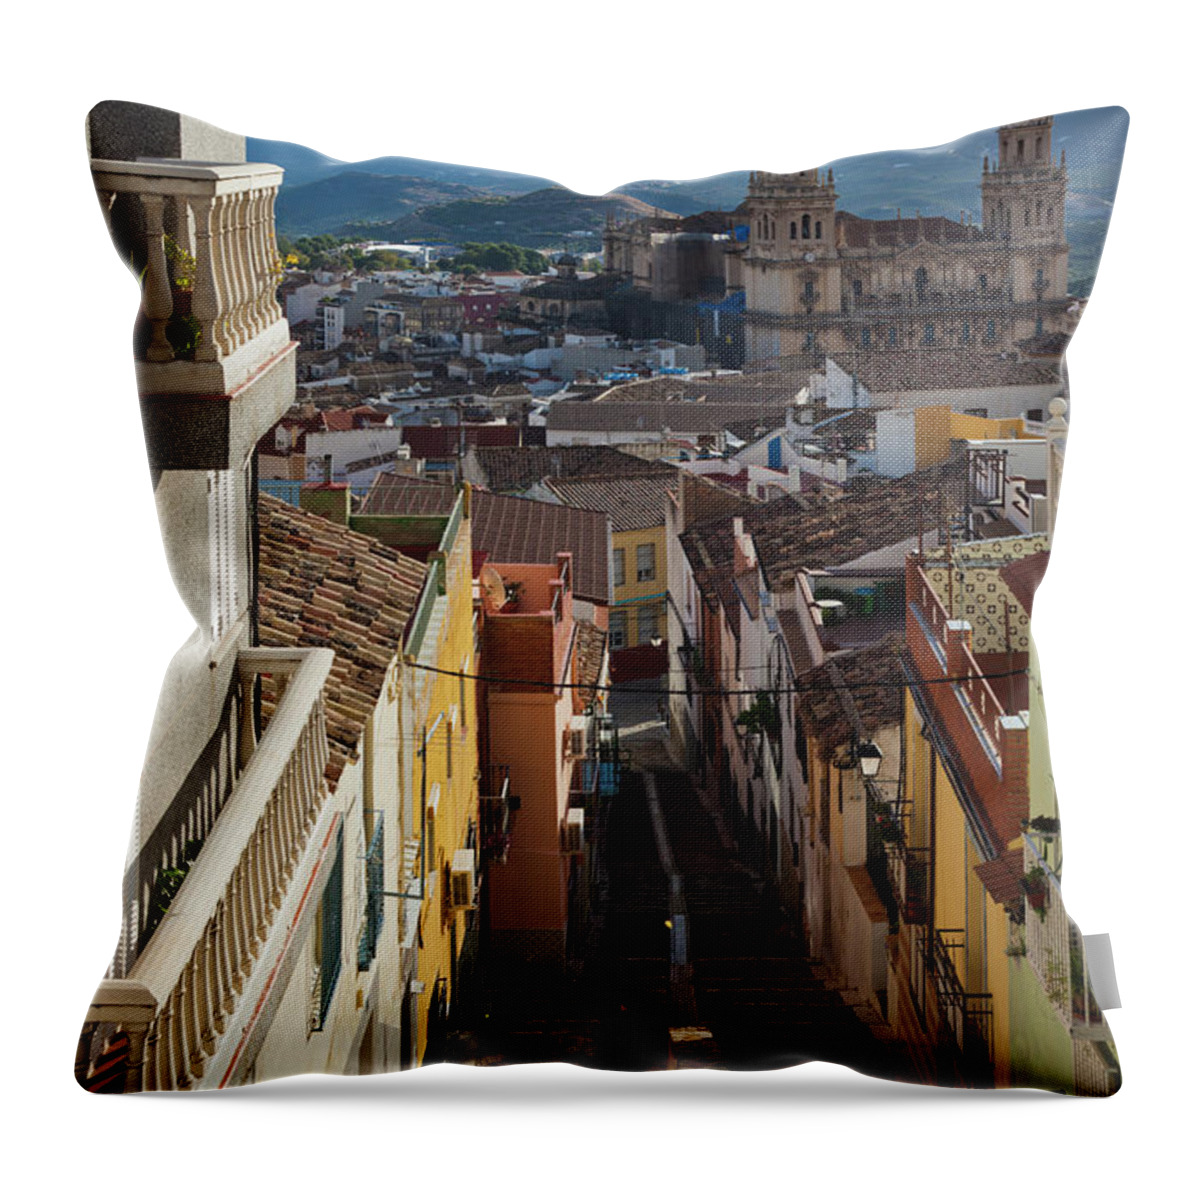 Steps Throw Pillow featuring the photograph Spain, Andalucia Region, Jaen Province #14 by Walter Bibikow